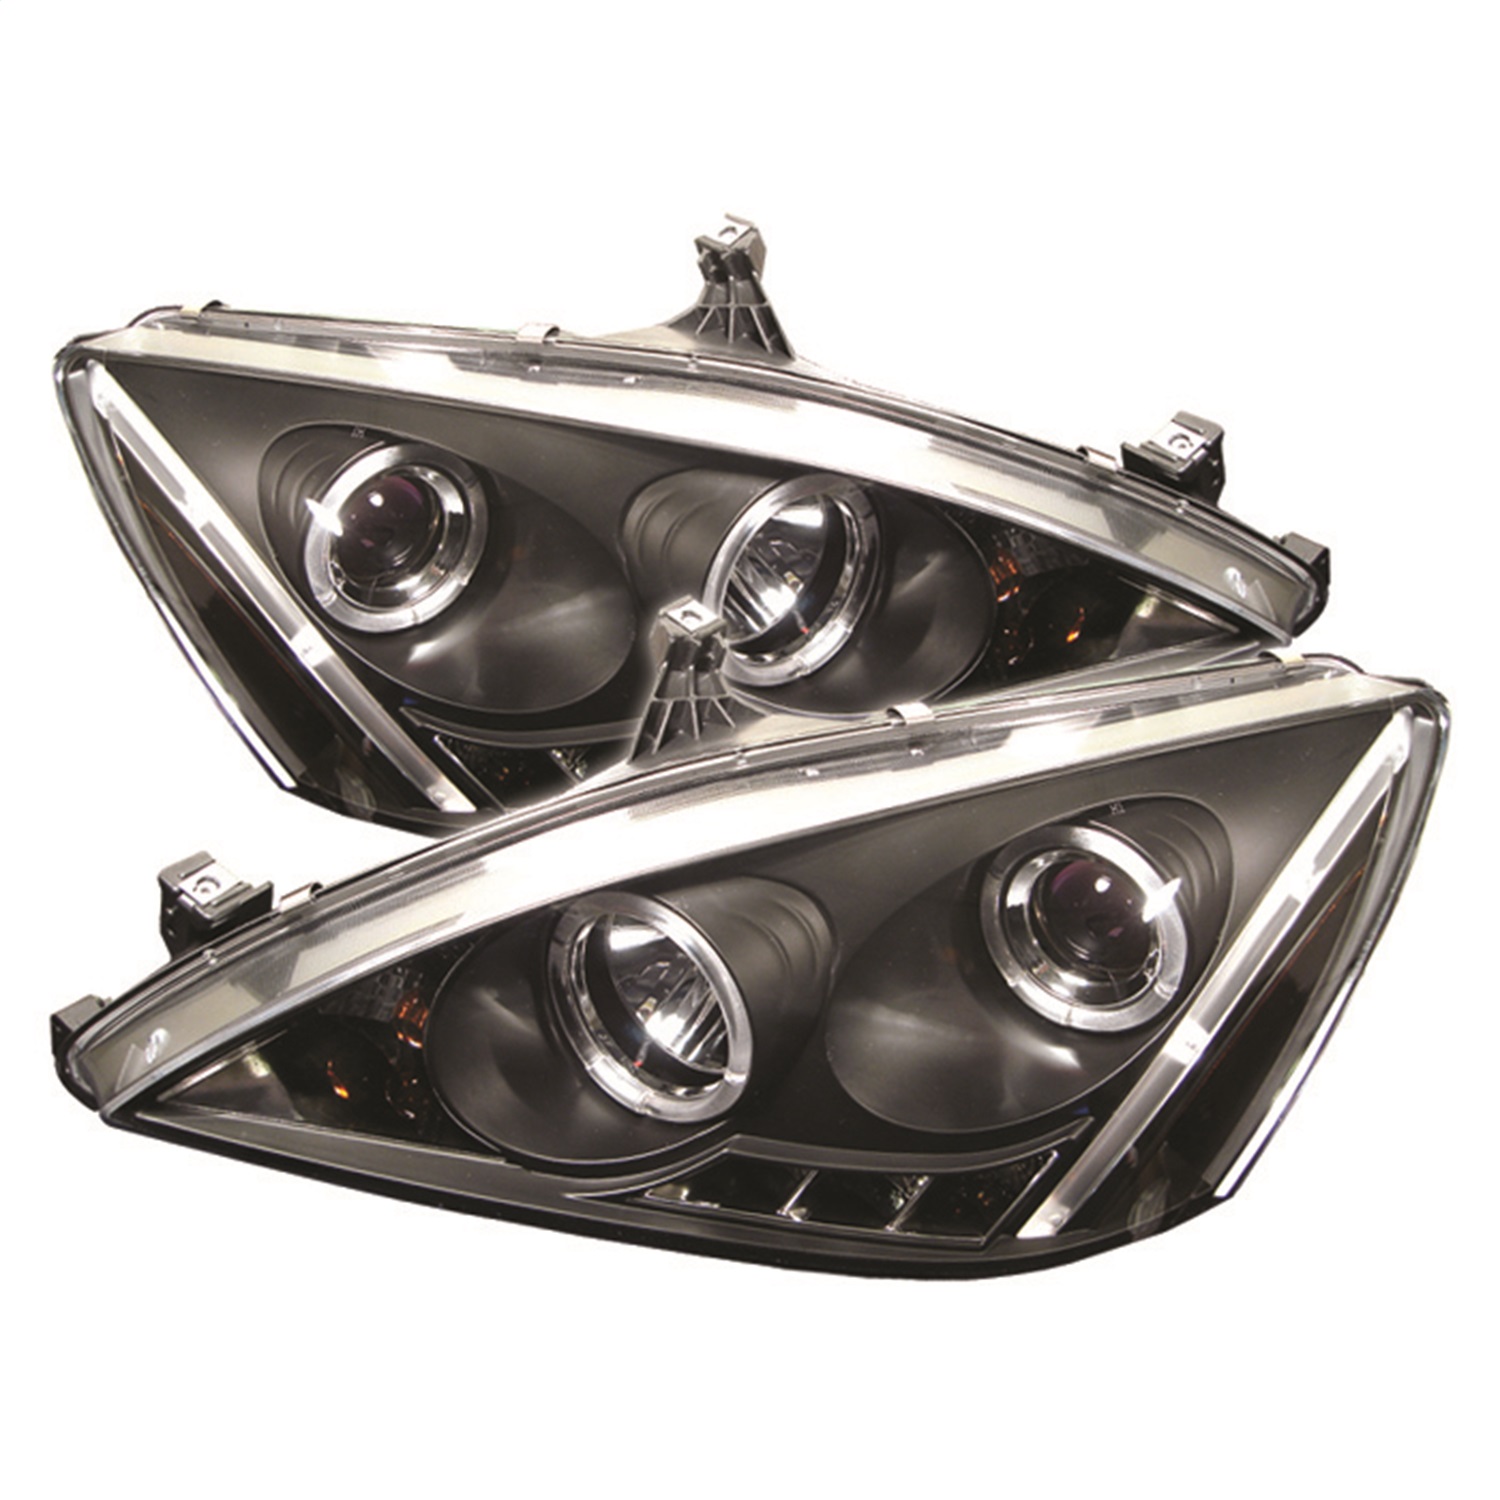 Spyder Auto 5010636 Halo LED Projector Headlights Fits 03-07 Accord